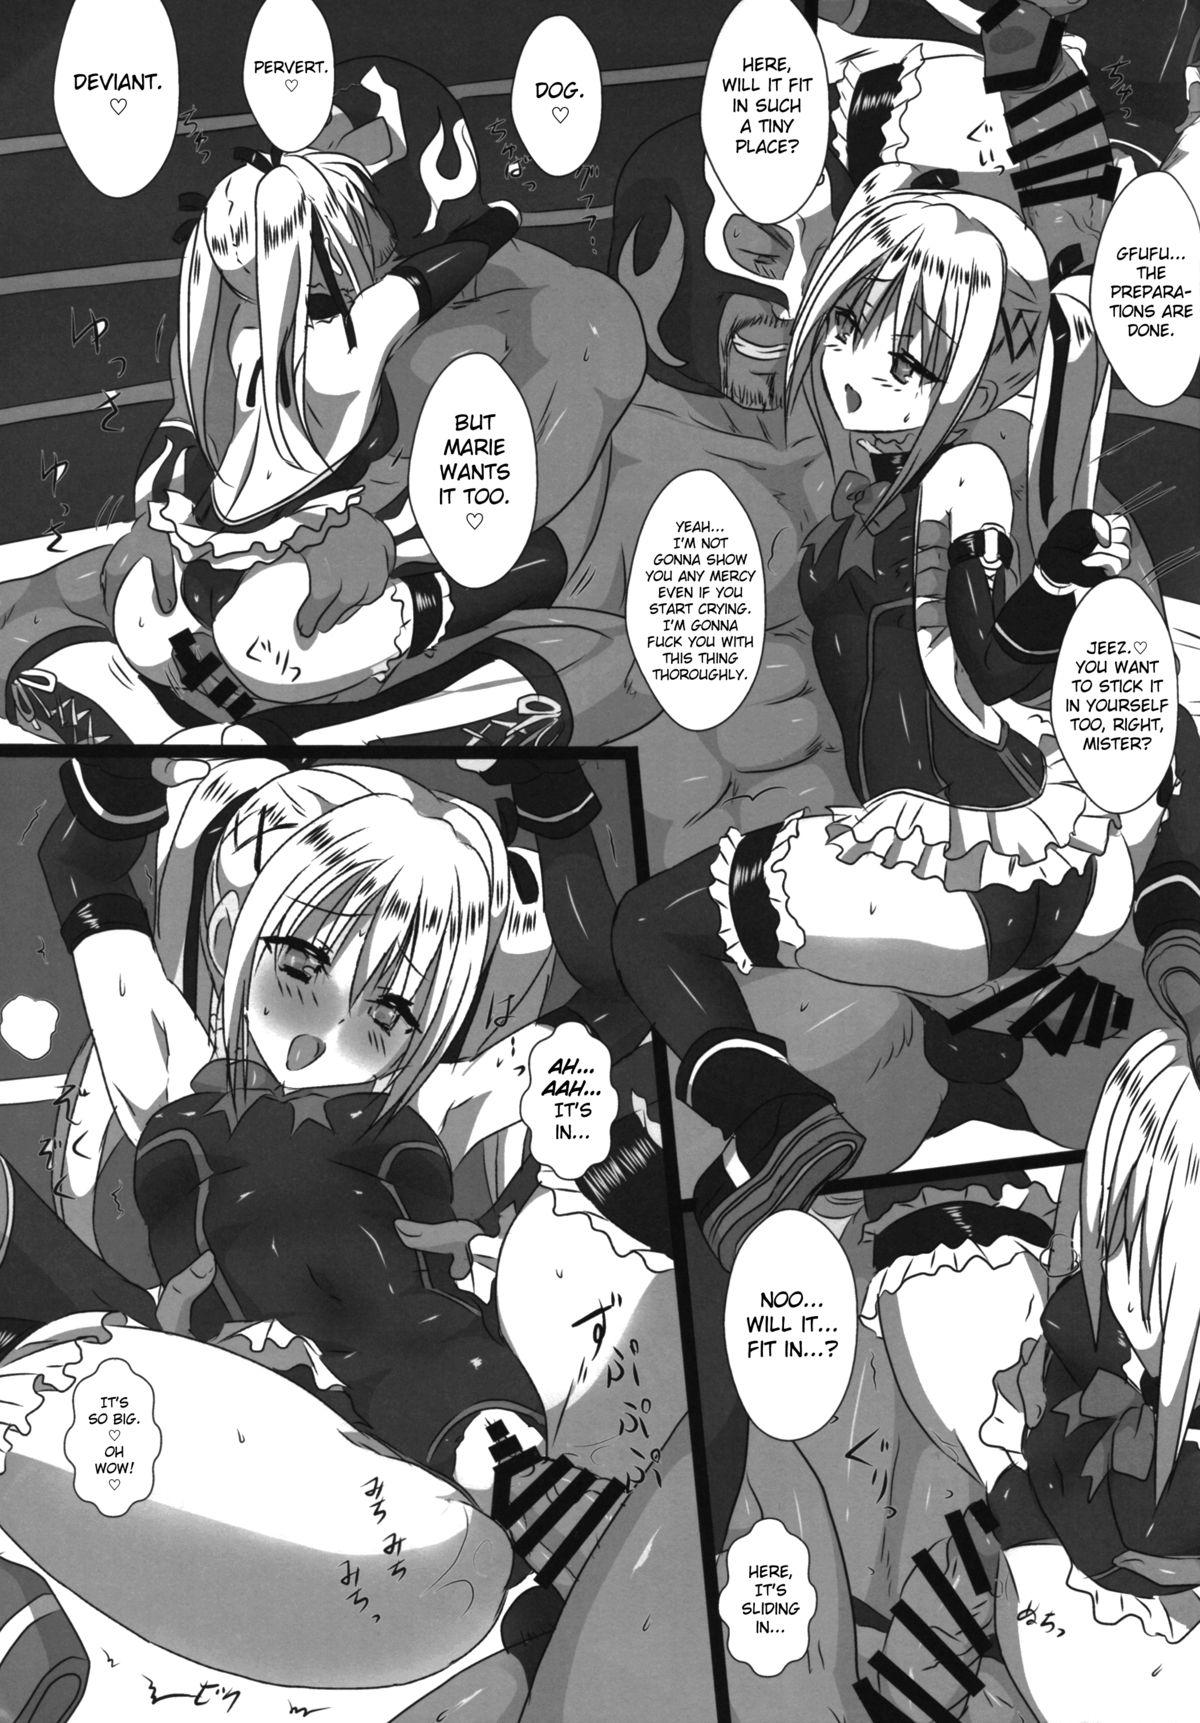 Homemade Koko de Shitai no ne...? | This is where you want to do it, right...? - Dead or alive Tight Pussy Fucked - Page 10